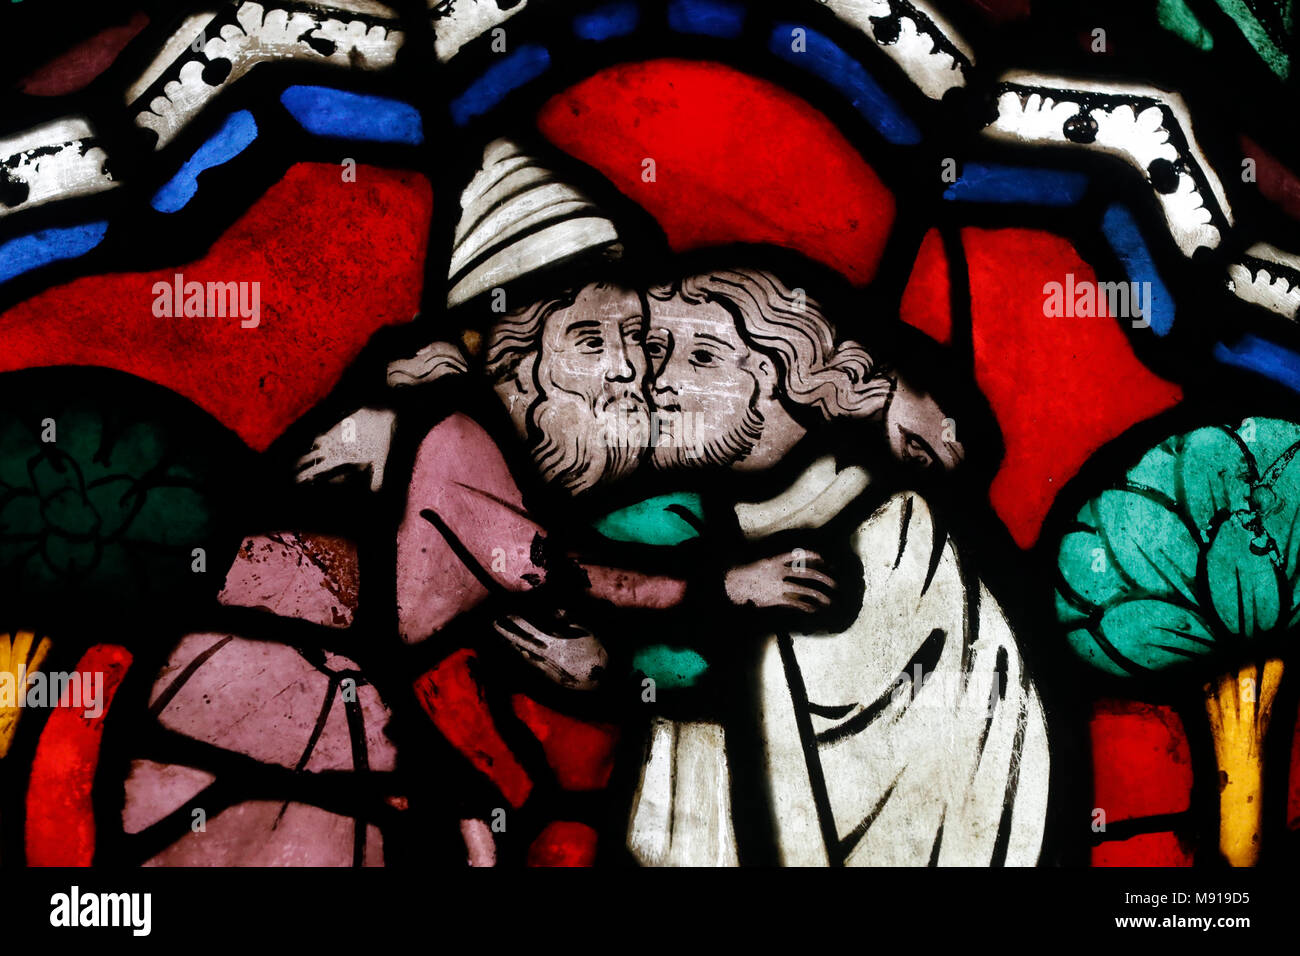 Oeuvre Notre-Dame Museum.  Stained glass window. Meeting of Abraham and Melchisedech.  St Thomas church. 13 th century.  Strasbourg. France. Stock Photo